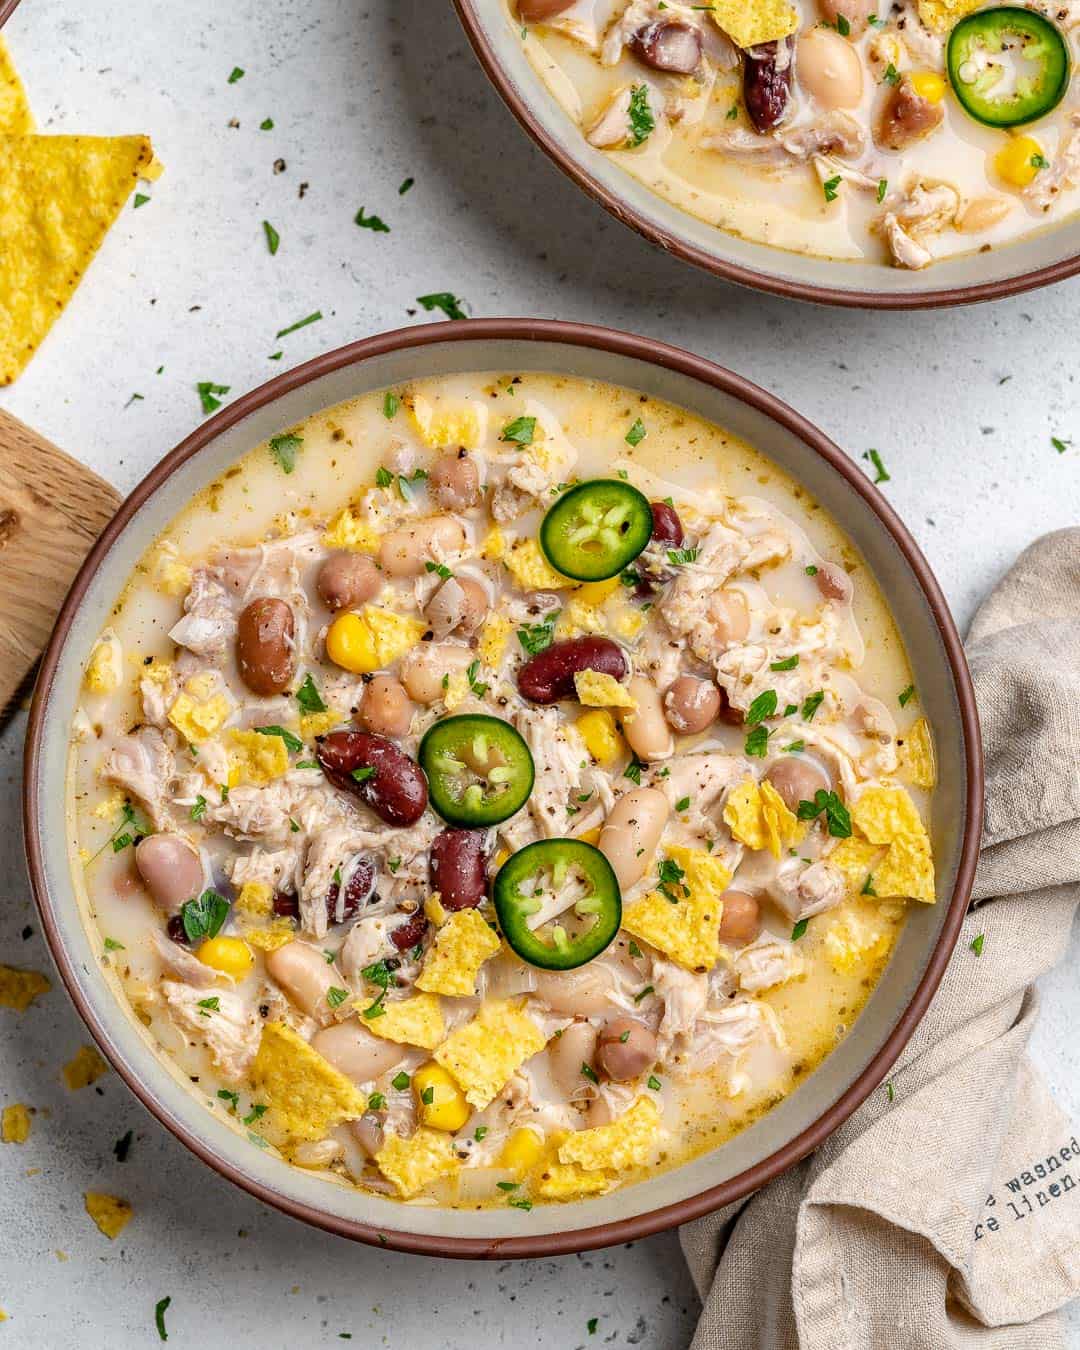 Easy White Chicken Chili Recipe 4 Beans Healthy Fitness Meals